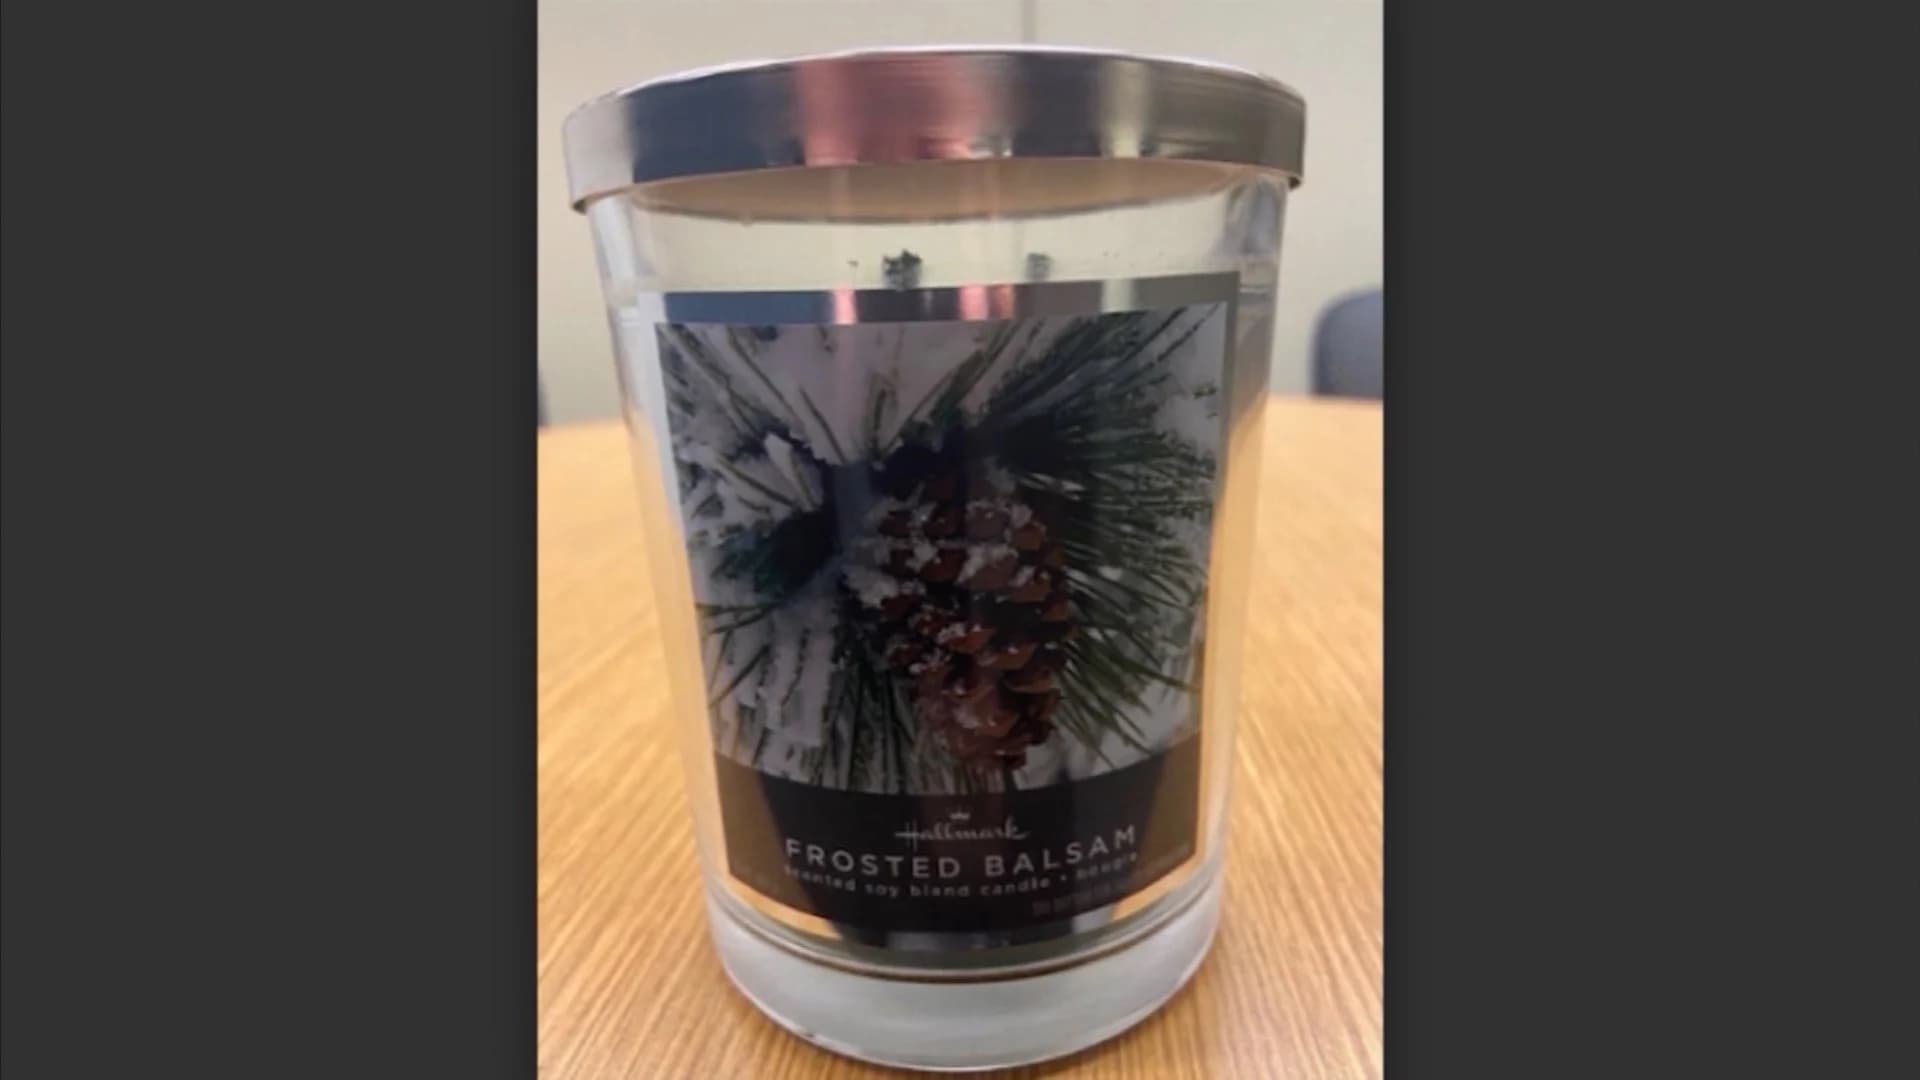 Hallmark recalls line of scented candles over fire, injury concerns